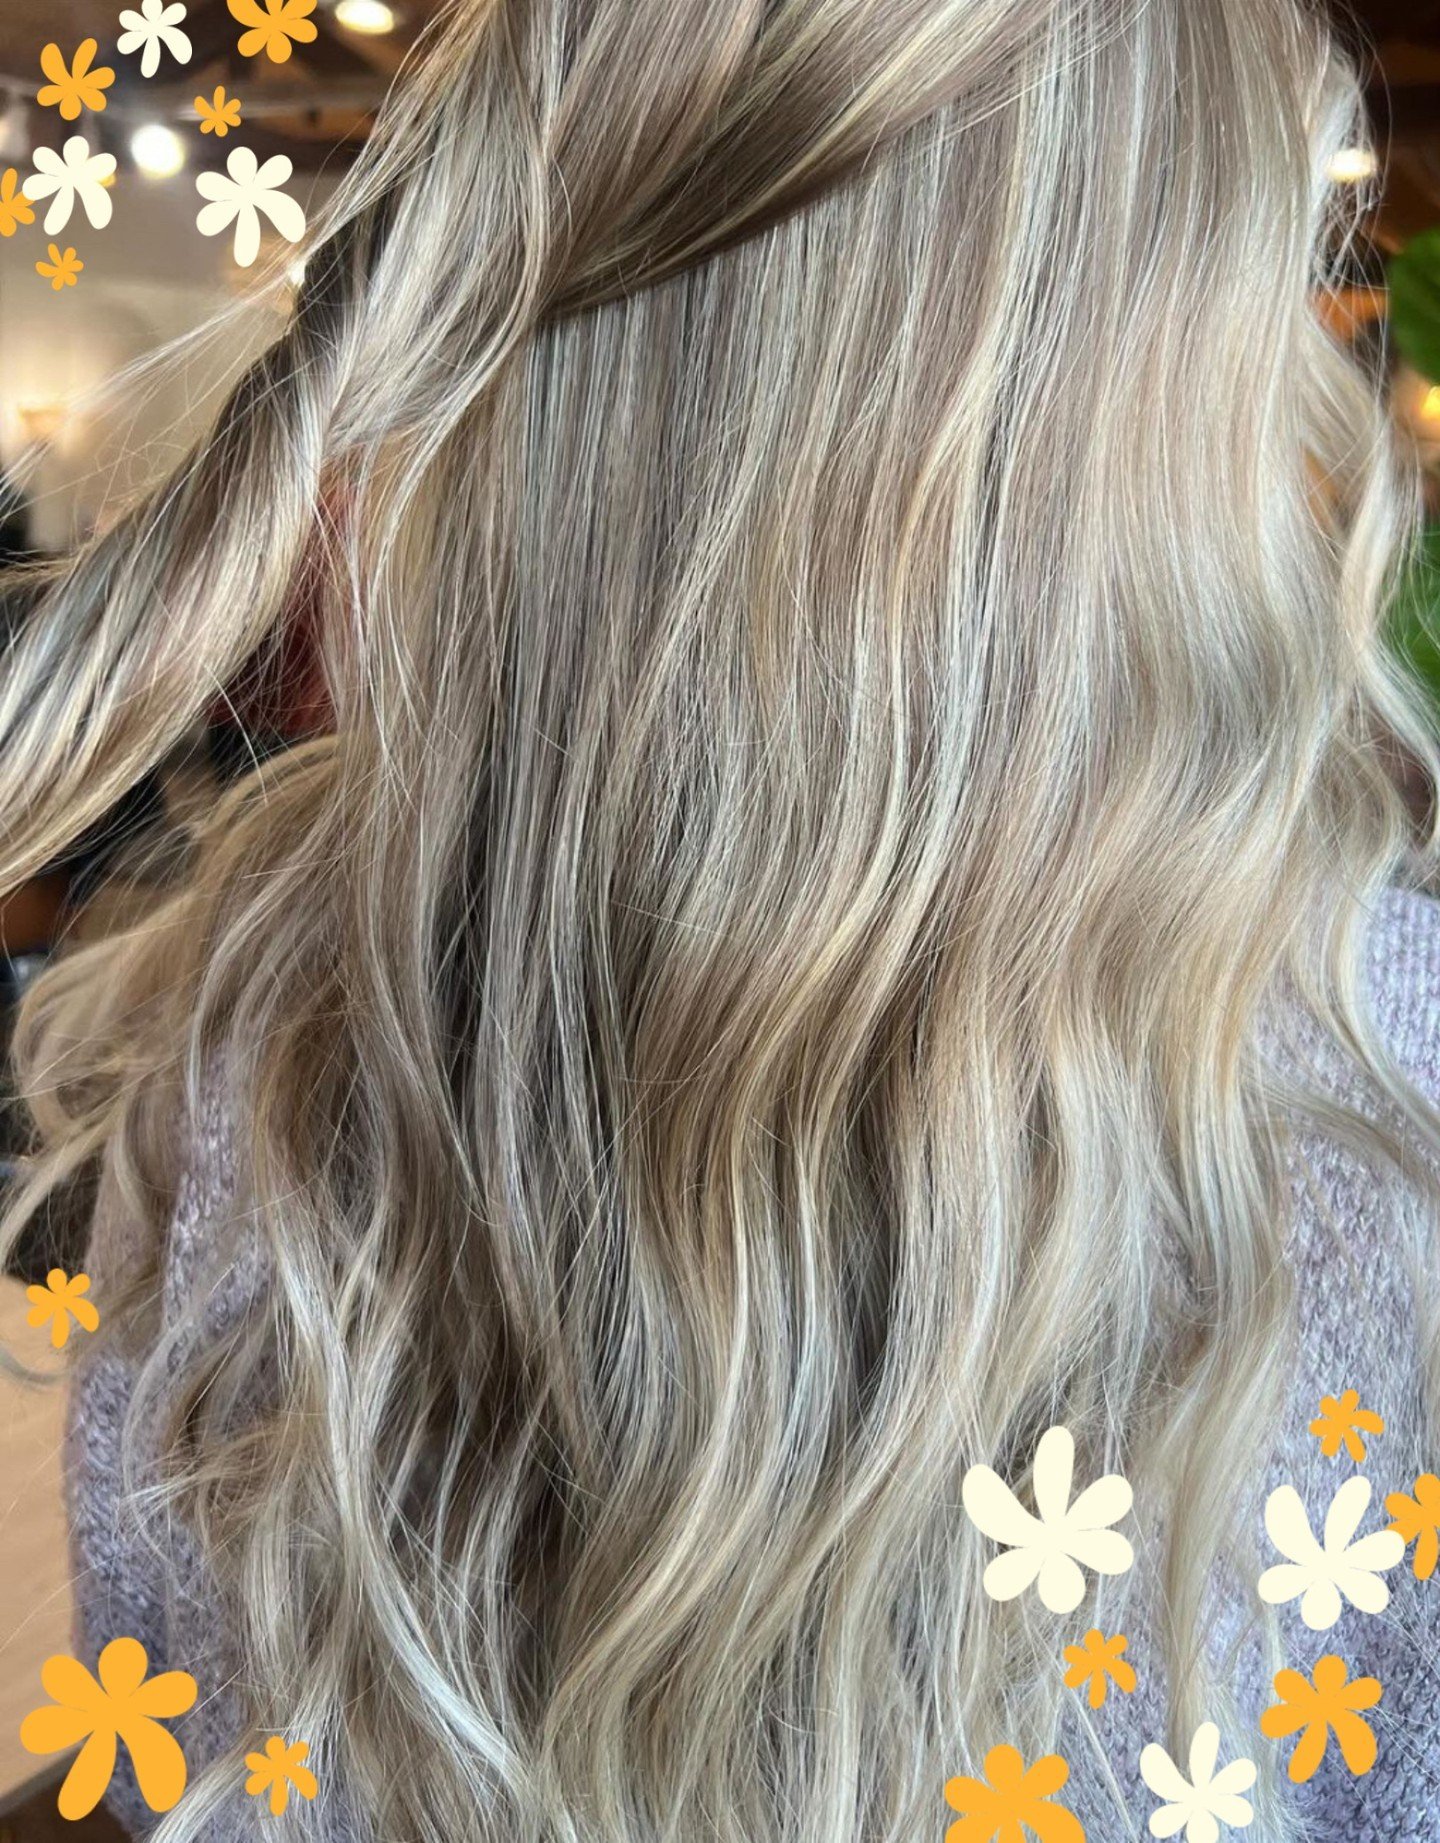 Lived in full ✨ or is she fully living in this hair color?! Book with @beauty_bystephv, head to her profile and book with the link in Bio.
*
*
*
#randco #randcocolor #randcolove #phoenixaz #phoenixazsalon #swoonsalon